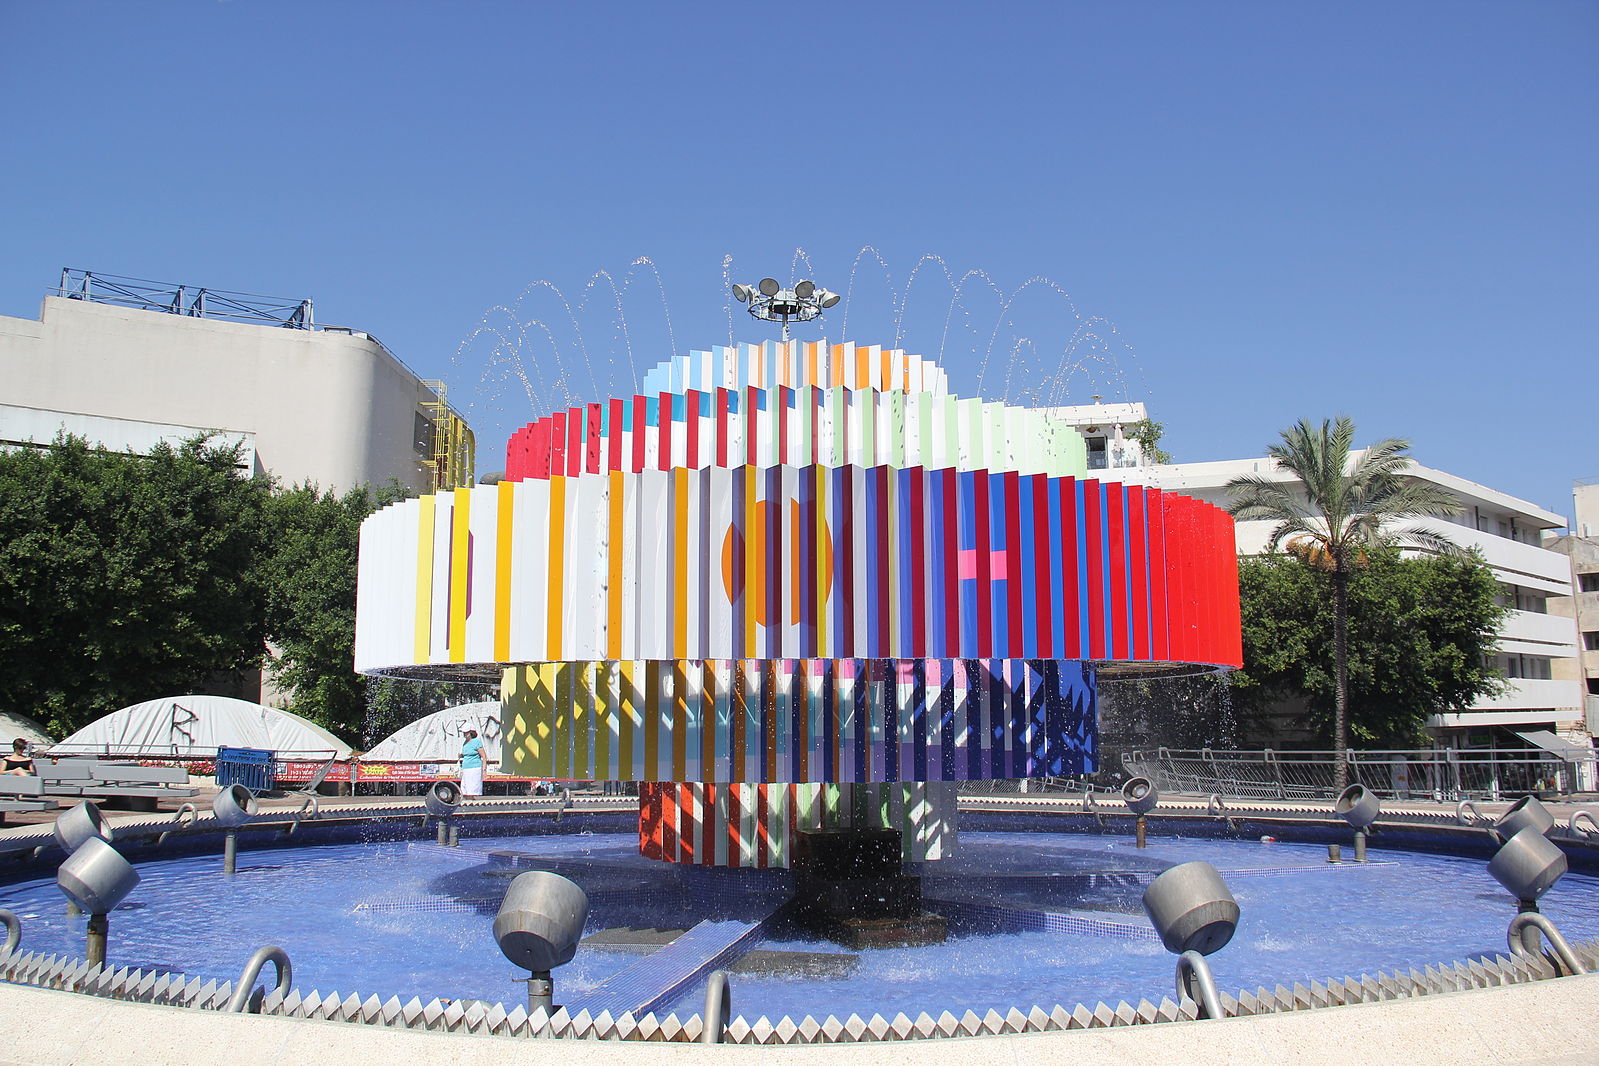 A circular water fountain with many colors spewing water into a pond